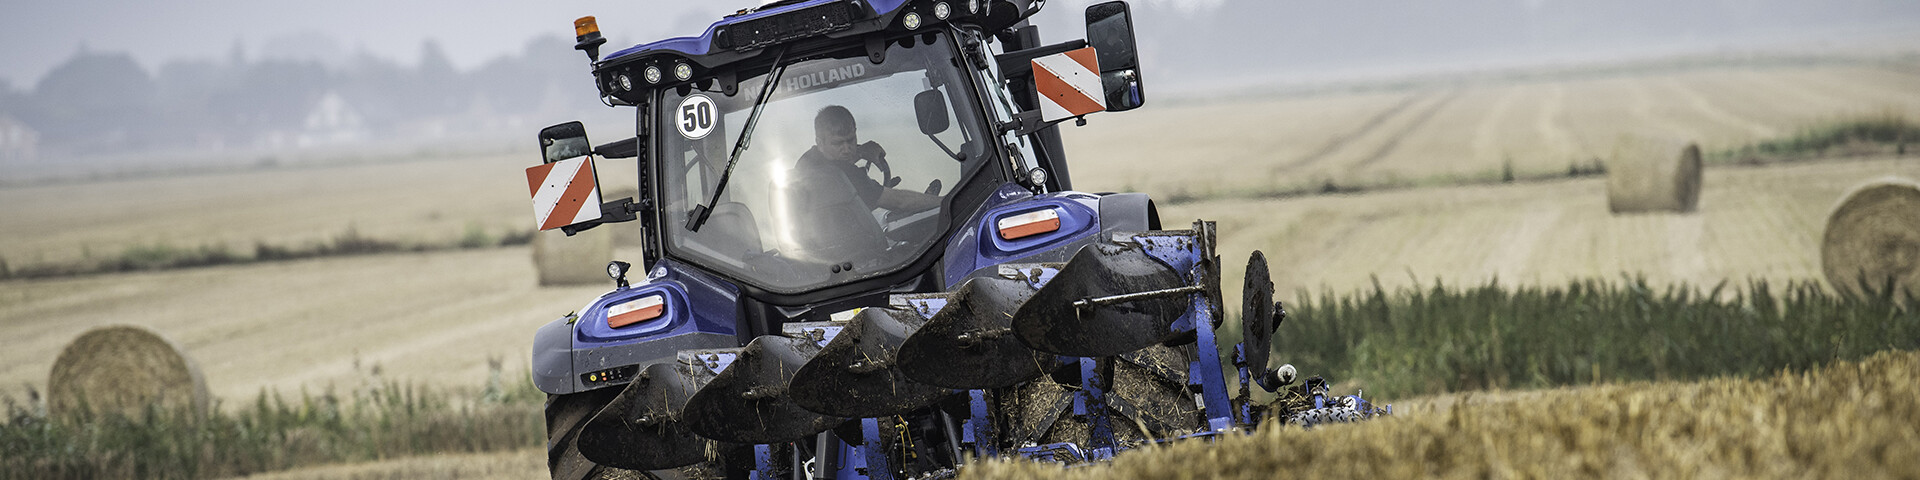 New Year, New Deals Tractor Retail Finance UK